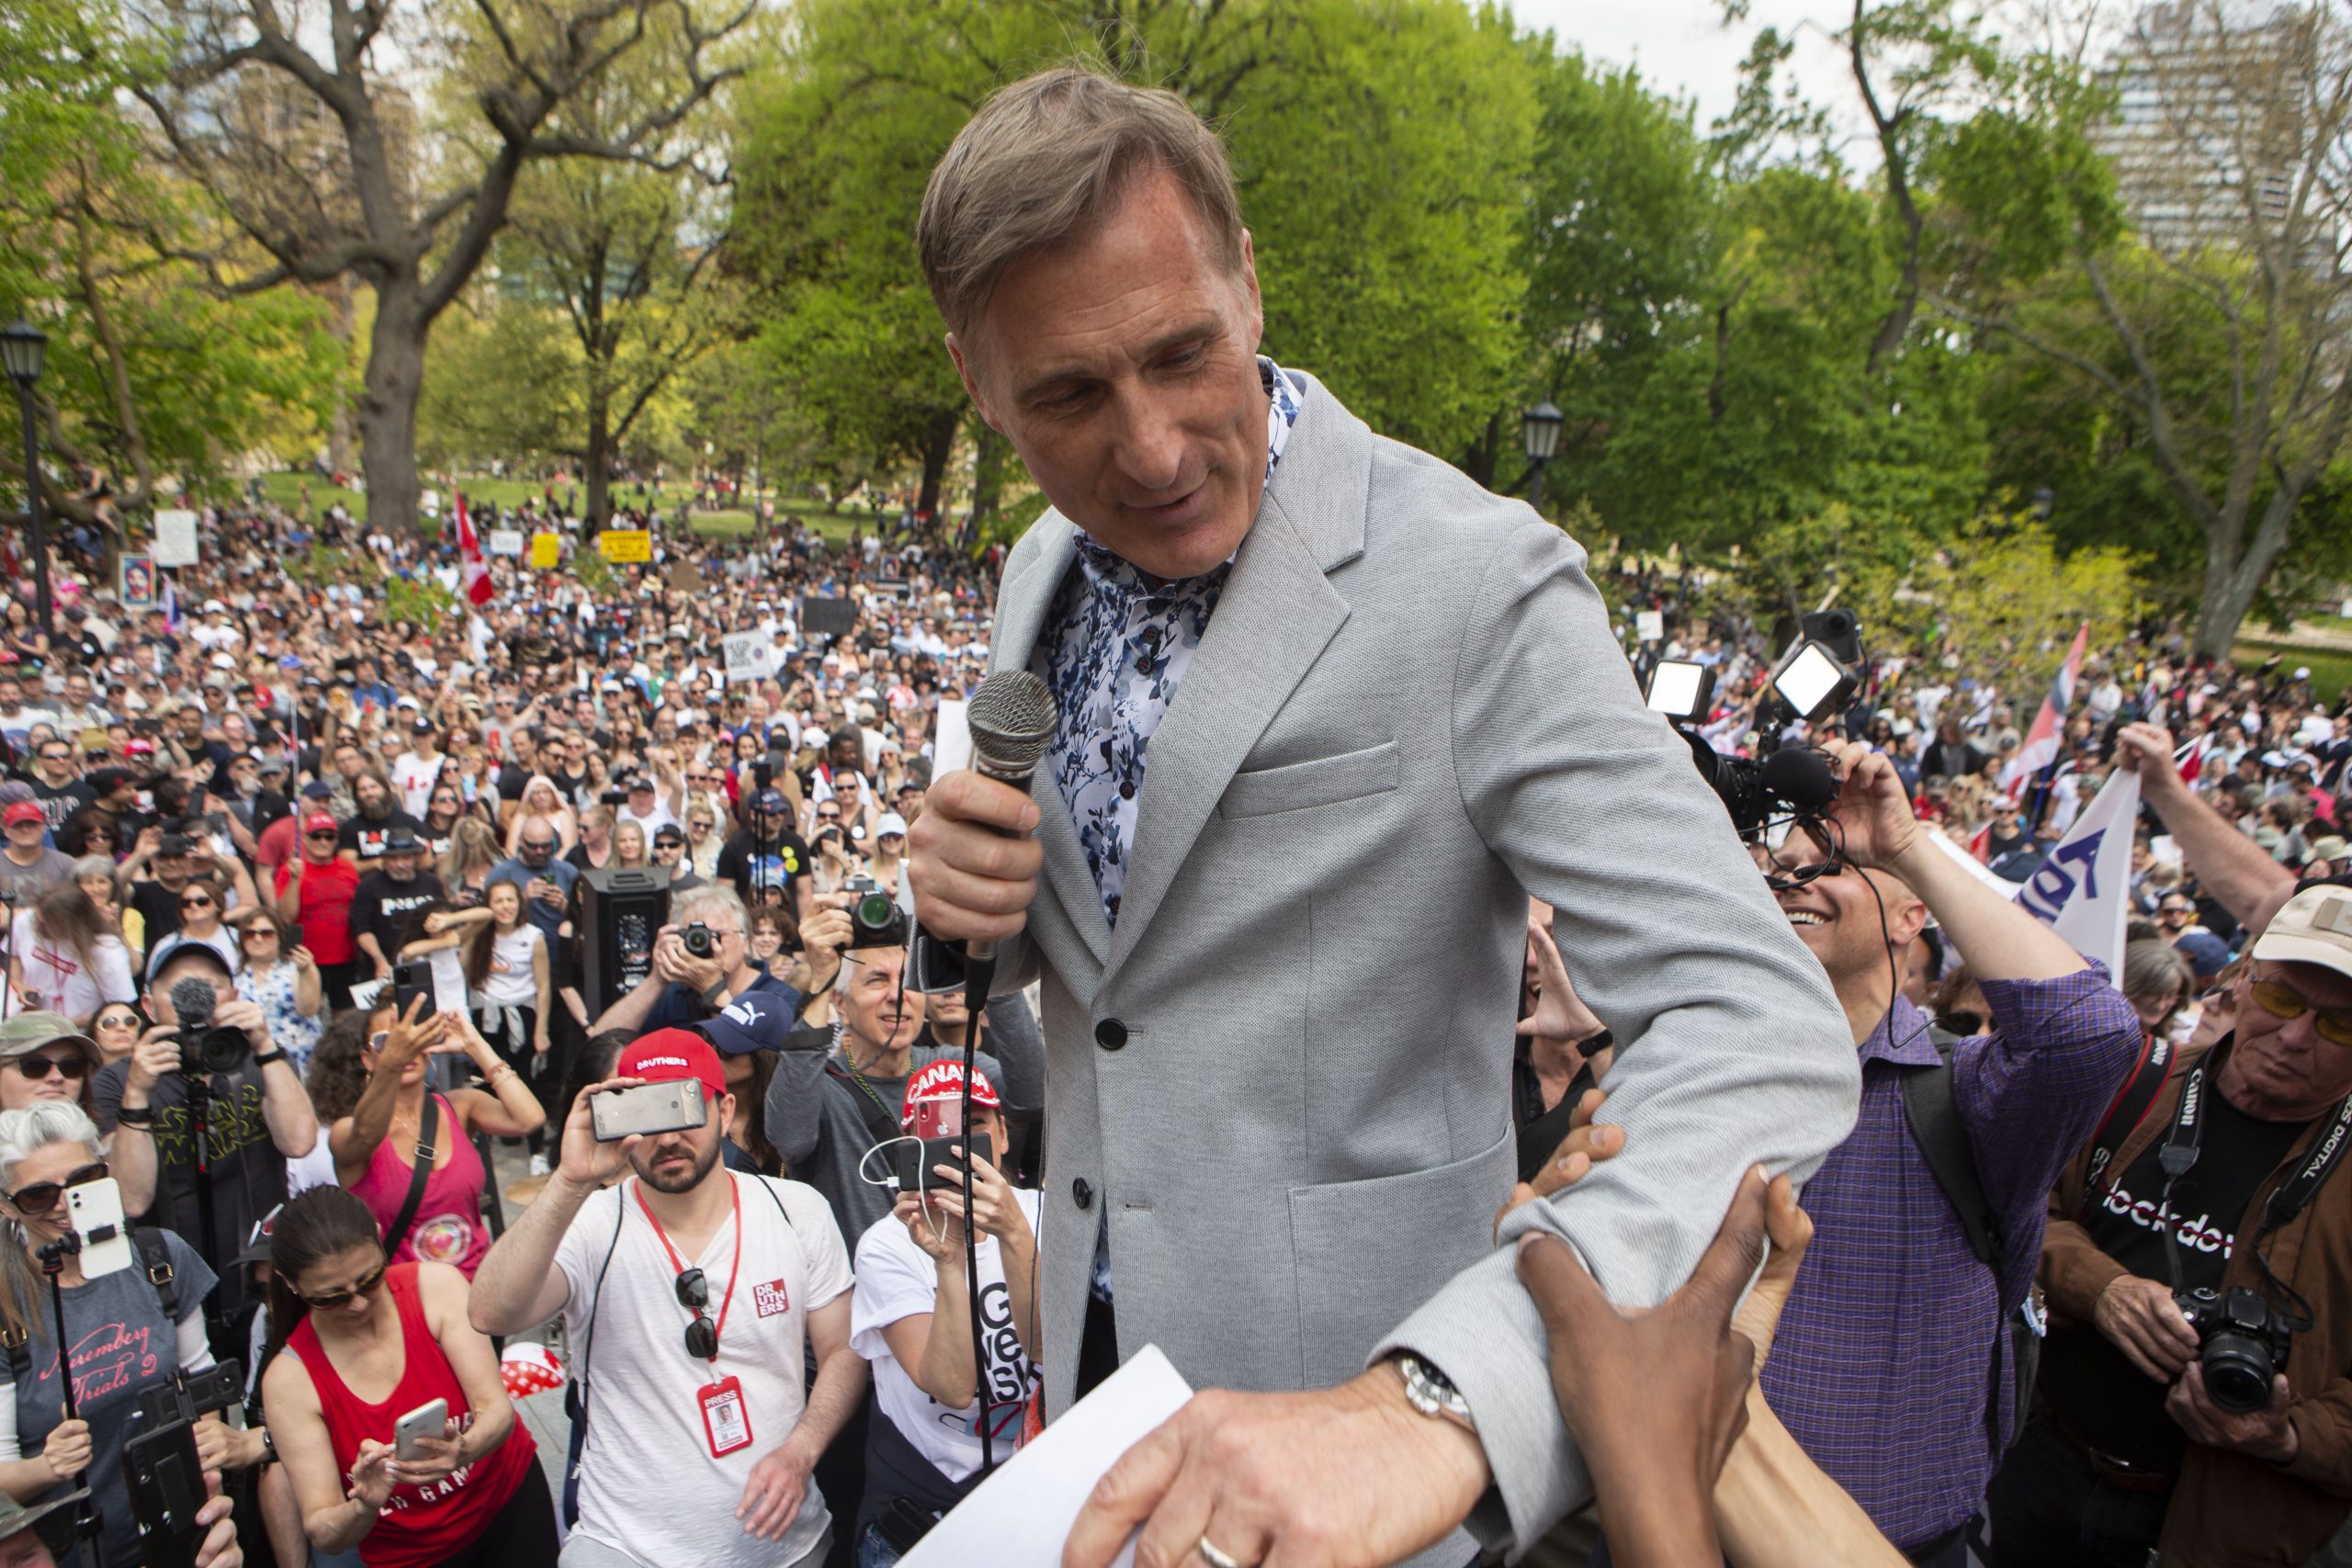 Can Maxime Bernier's Stand for Traditional Family Values Challenge the Woke Culture in Canadian Politics?